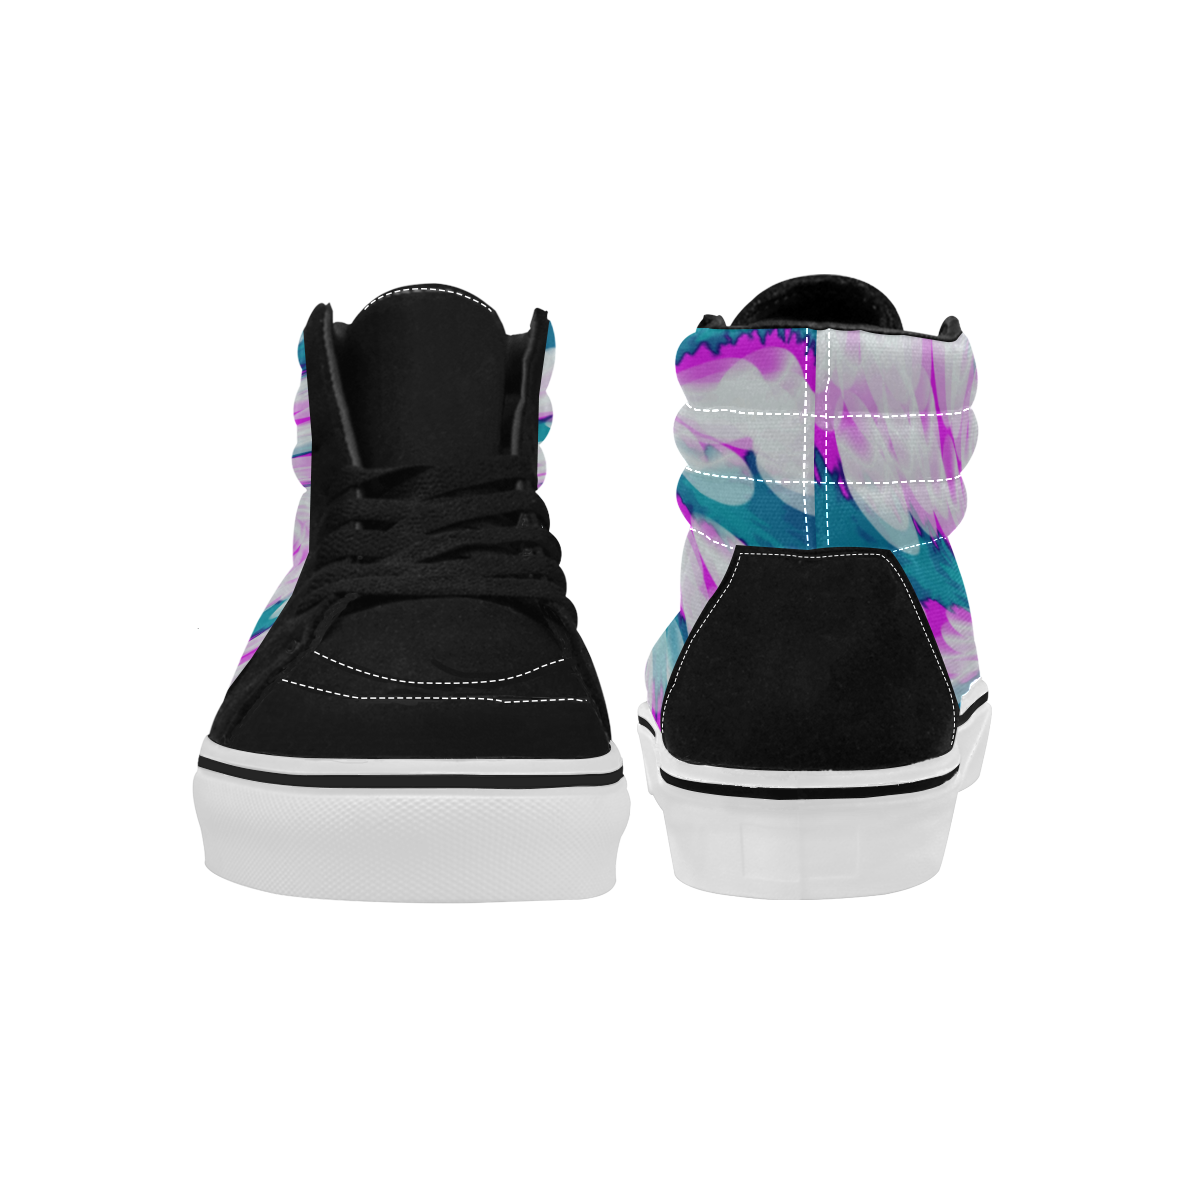 Turquoise Pink Tie Dye Swirl Abstract Women's High Top Skateboarding Shoes (Model E001-1)